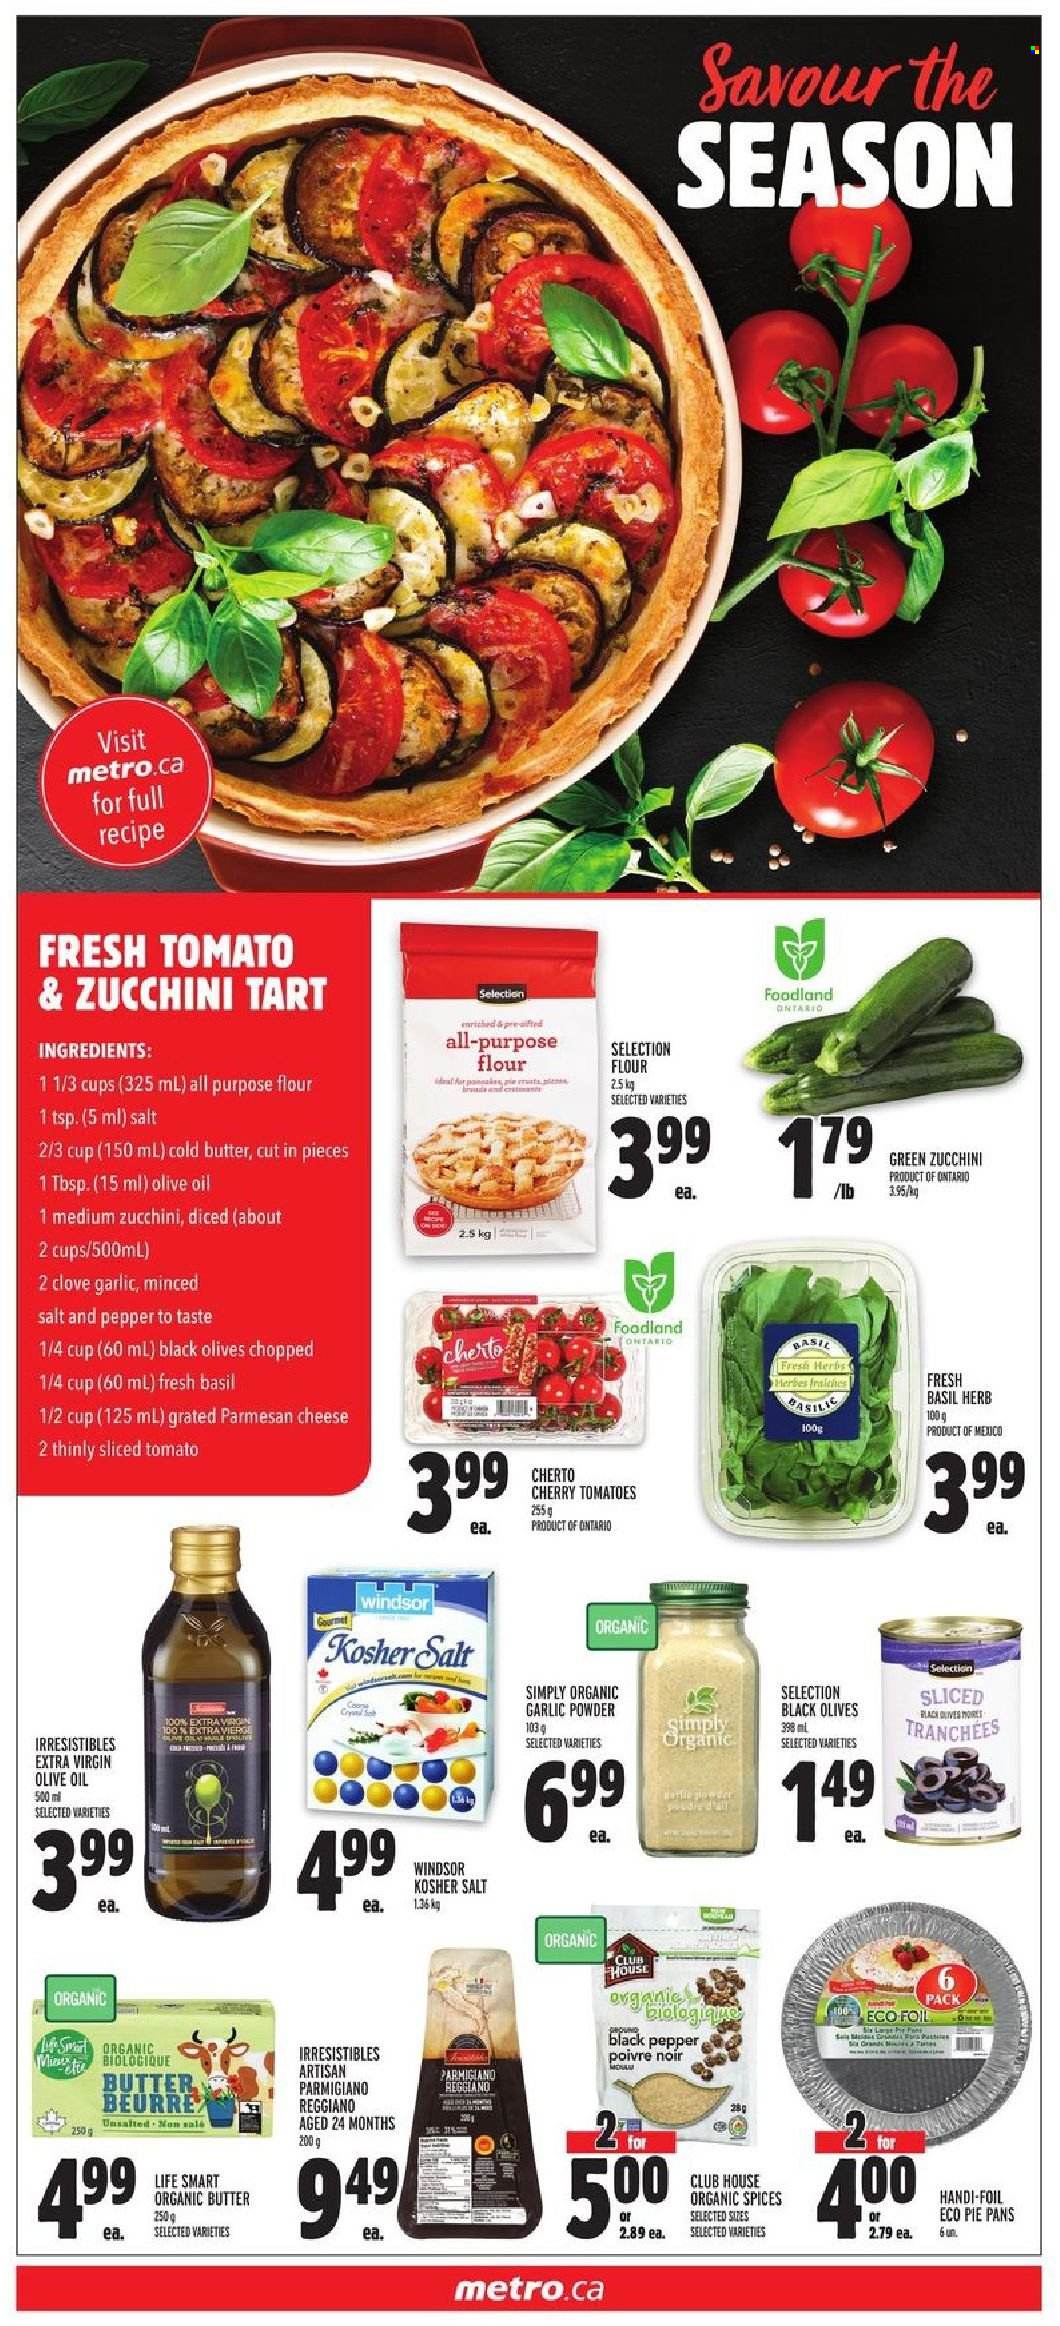 thumbnail - Metro Flyer - September 23, 2021 - September 29, 2021 - Sales products - tomatoes, zucchini, cherries, parmesan, cheese, Parmigiano Reggiano, butter, all purpose flour, flour, esponja, black pepper, cloves, garlic powder, extra virgin olive oil, olive oil, oil, olives. Page 9.